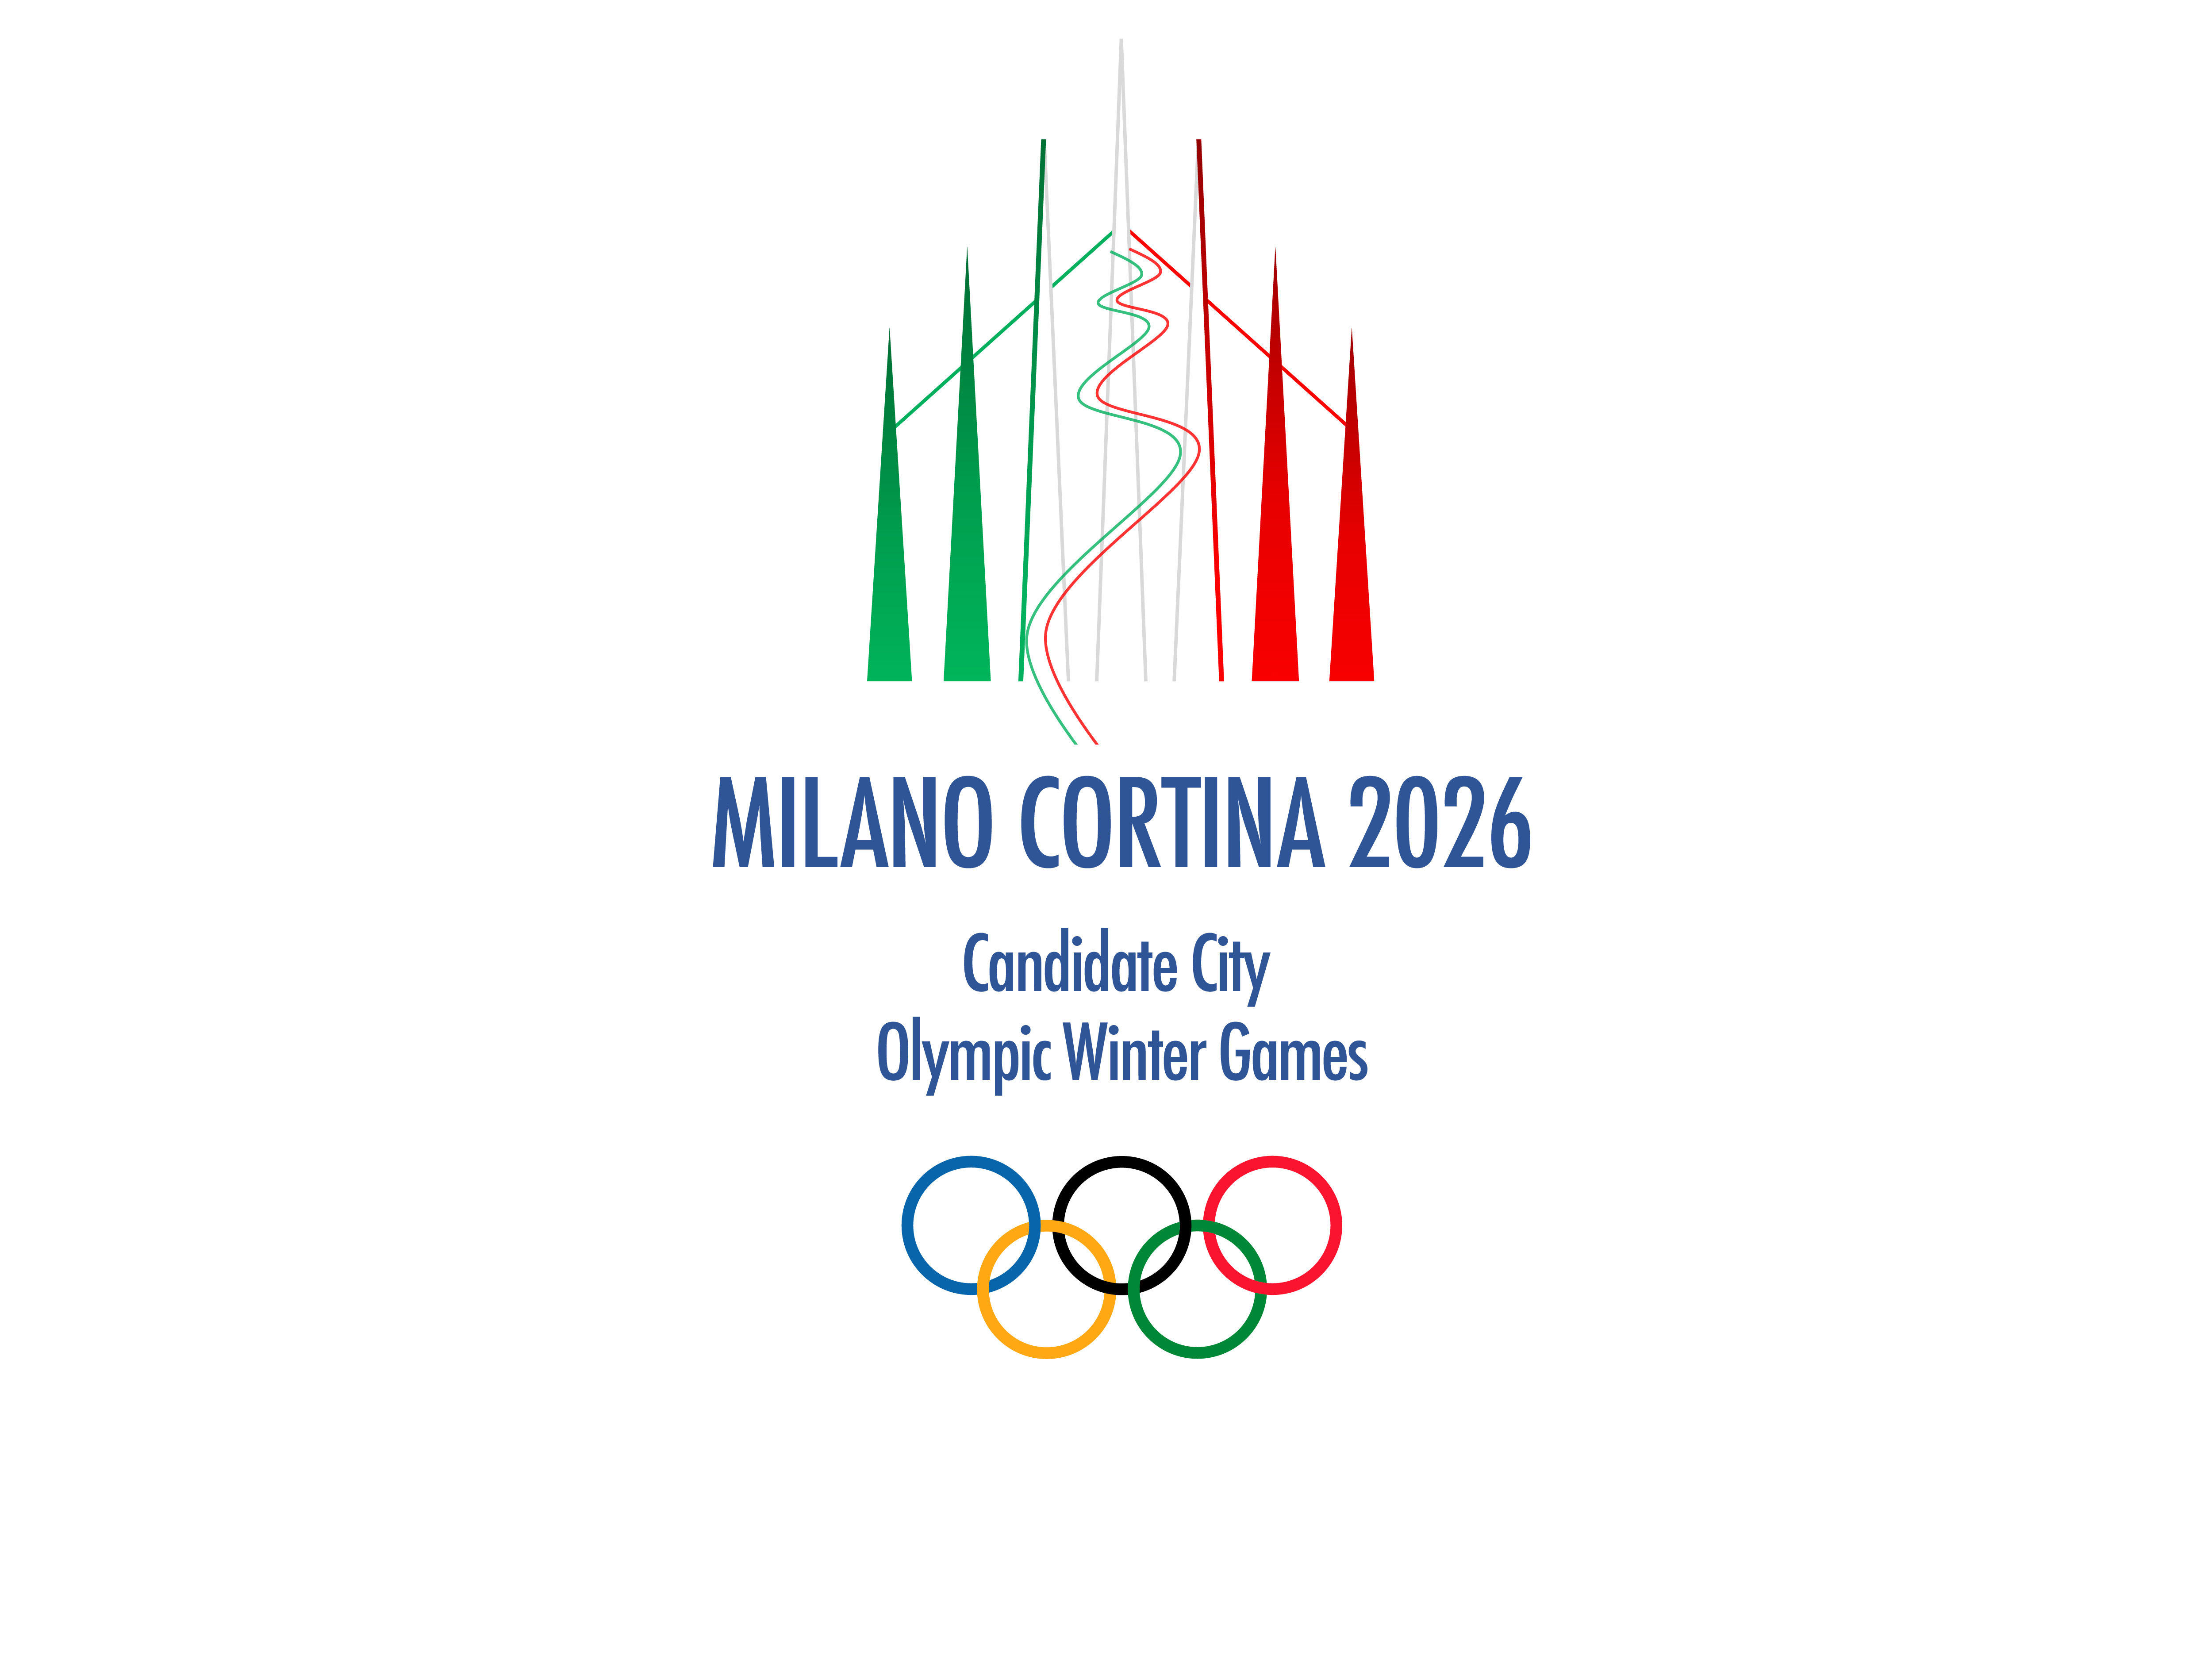 Introducing Milan Cortina 2026 to the world. Malagò: candidacy under the sign of tradition and innovation